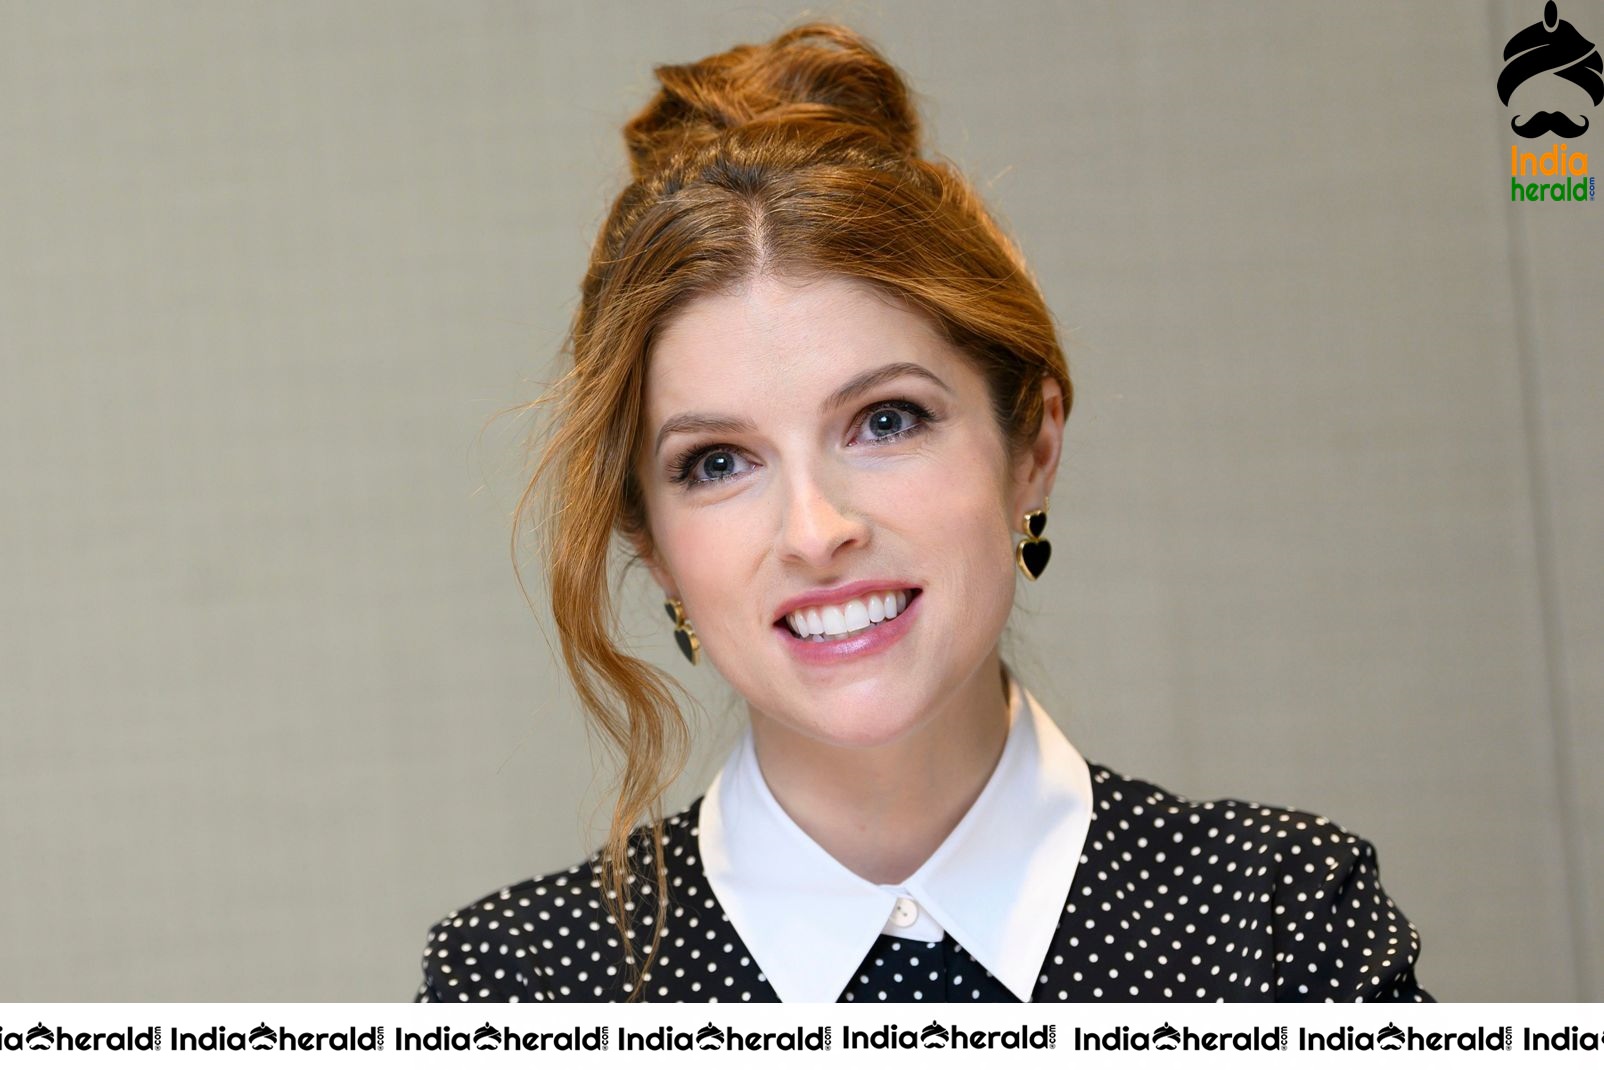 Anna Kendrick at Trolls World Tour Press Conference in Glendale Set 1